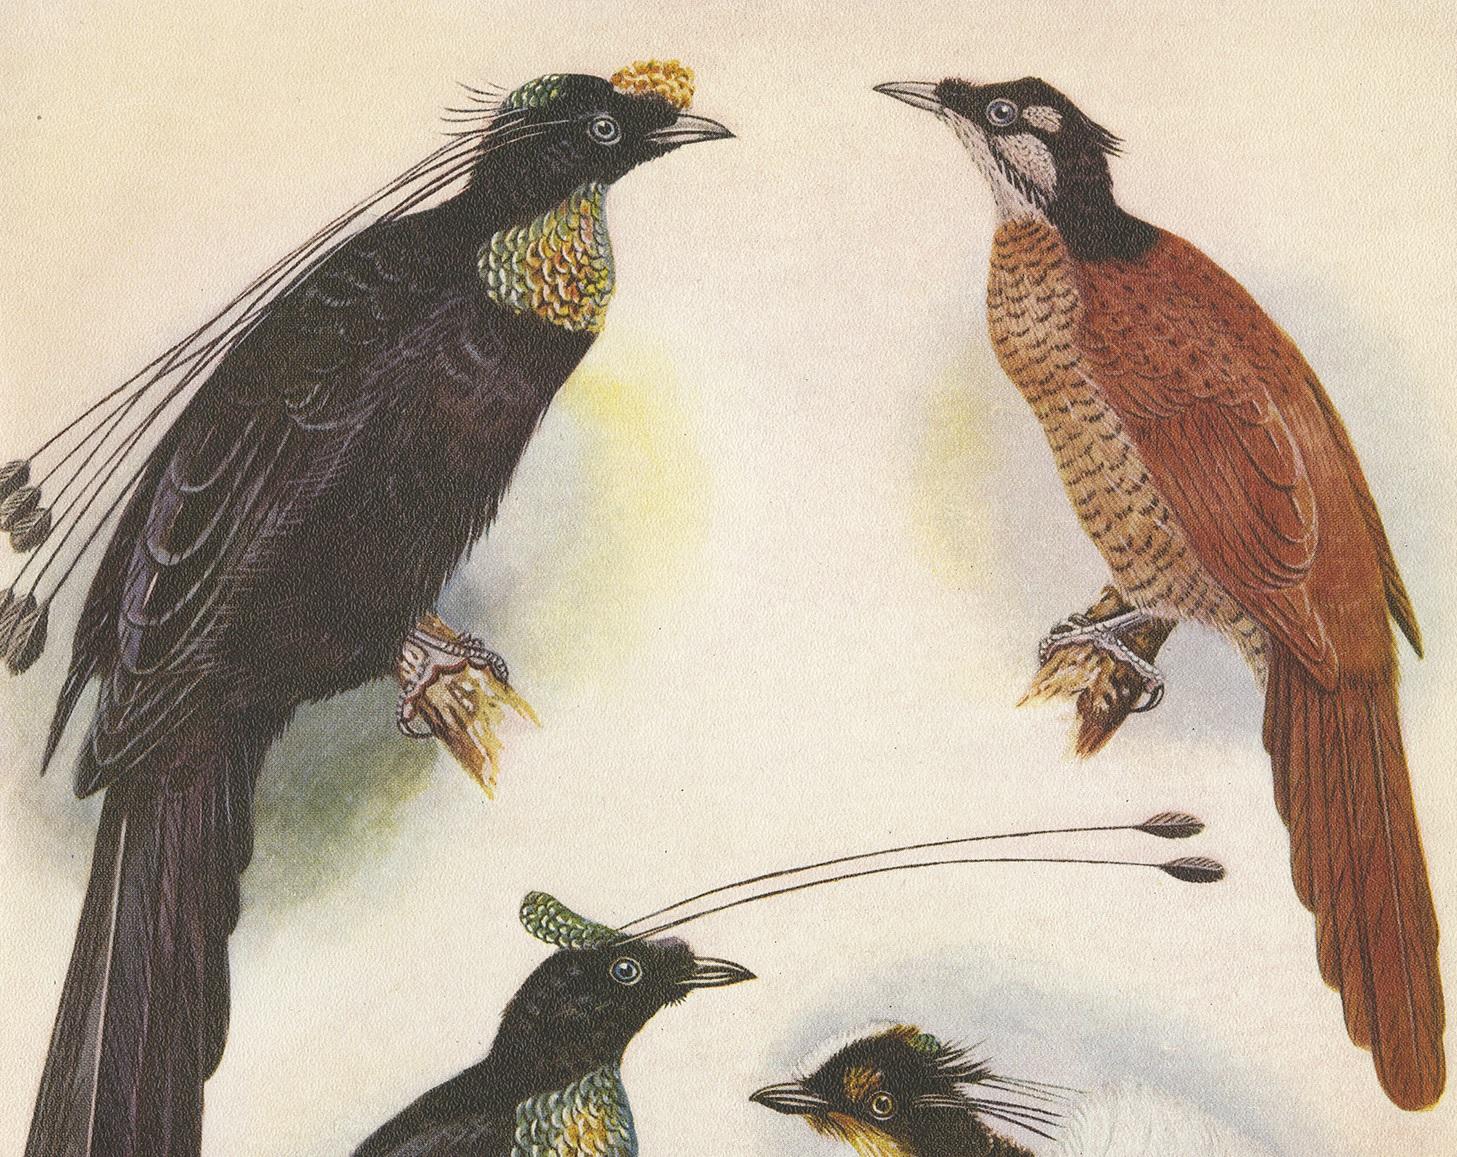 Decorative print illustrating the Wahnes' Six-Plumed Bird of Paradise, Duivenbode's Bird of Paradise and the Carol Six-Plumed Bird of Paradise. This authentic print originates from 'Birds of Paradise and Bower Birds' by Tom Iredale. With colored